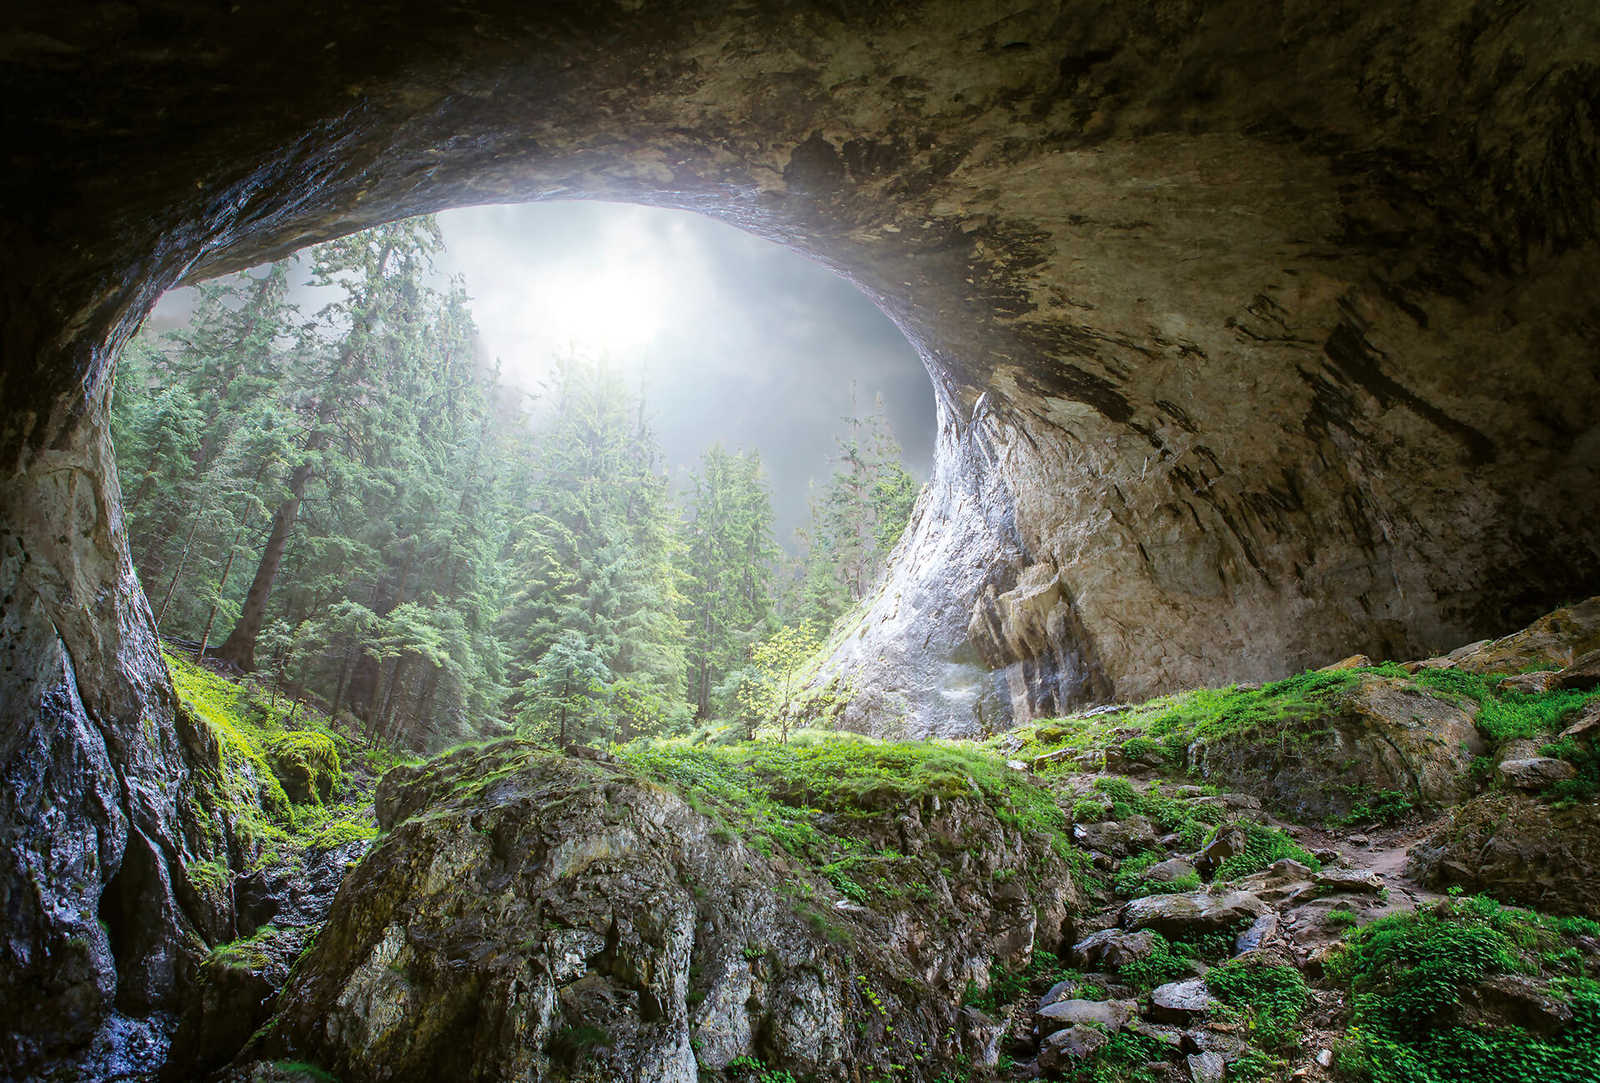         Nature mural cave in the forest - green, grey, brown
    